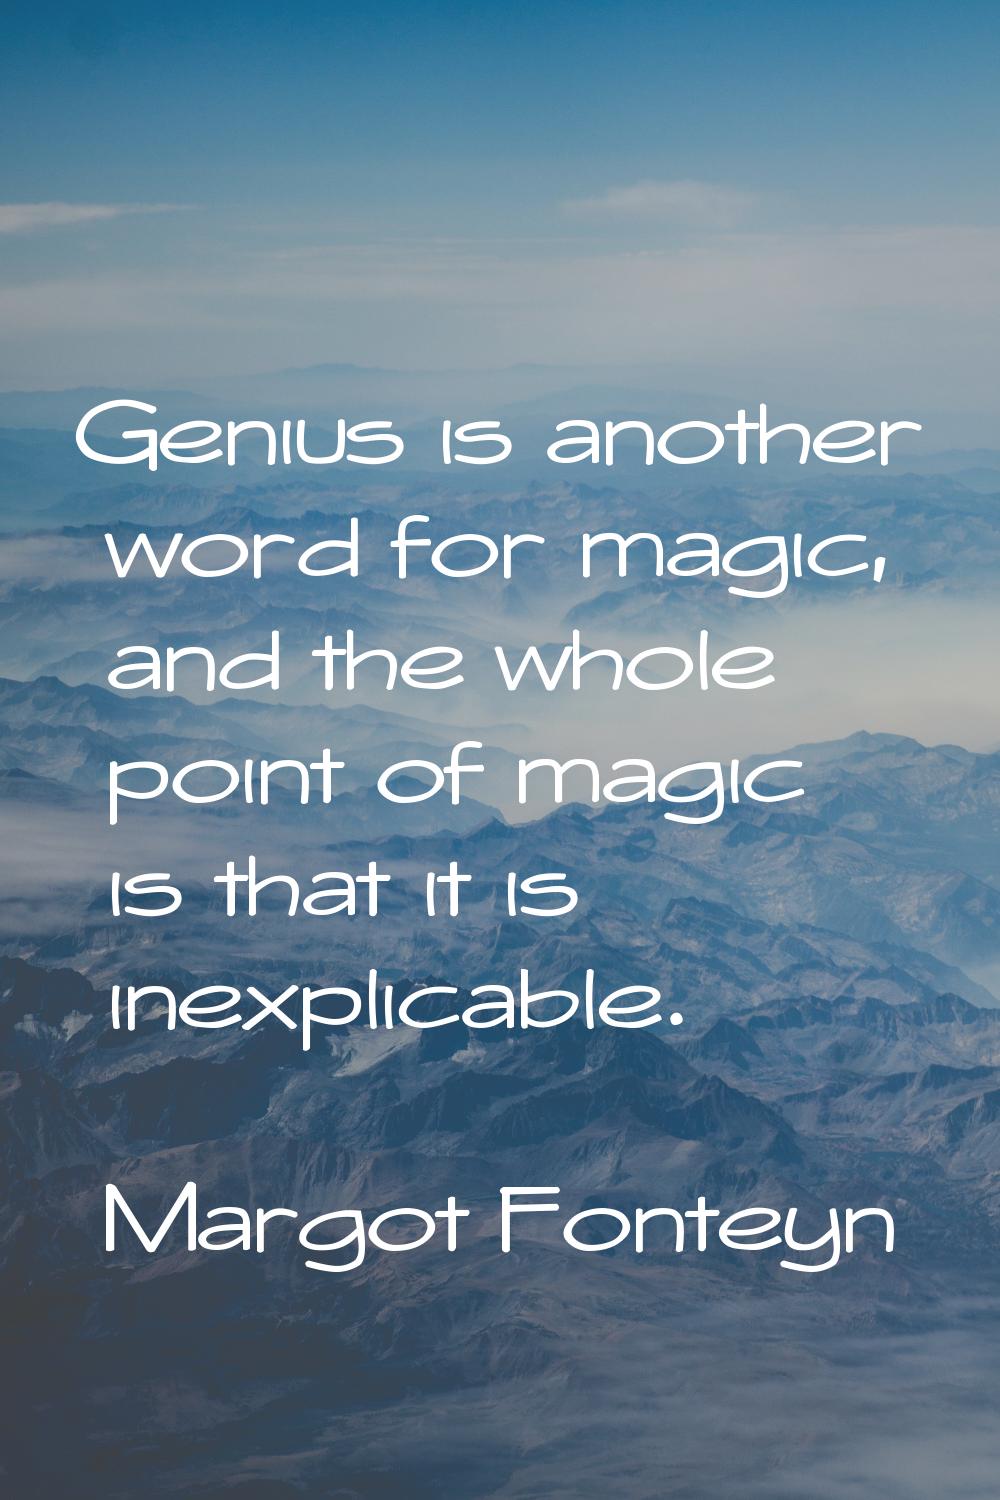 Genius is another word for magic, and the whole point of magic is that it is inexplicable.